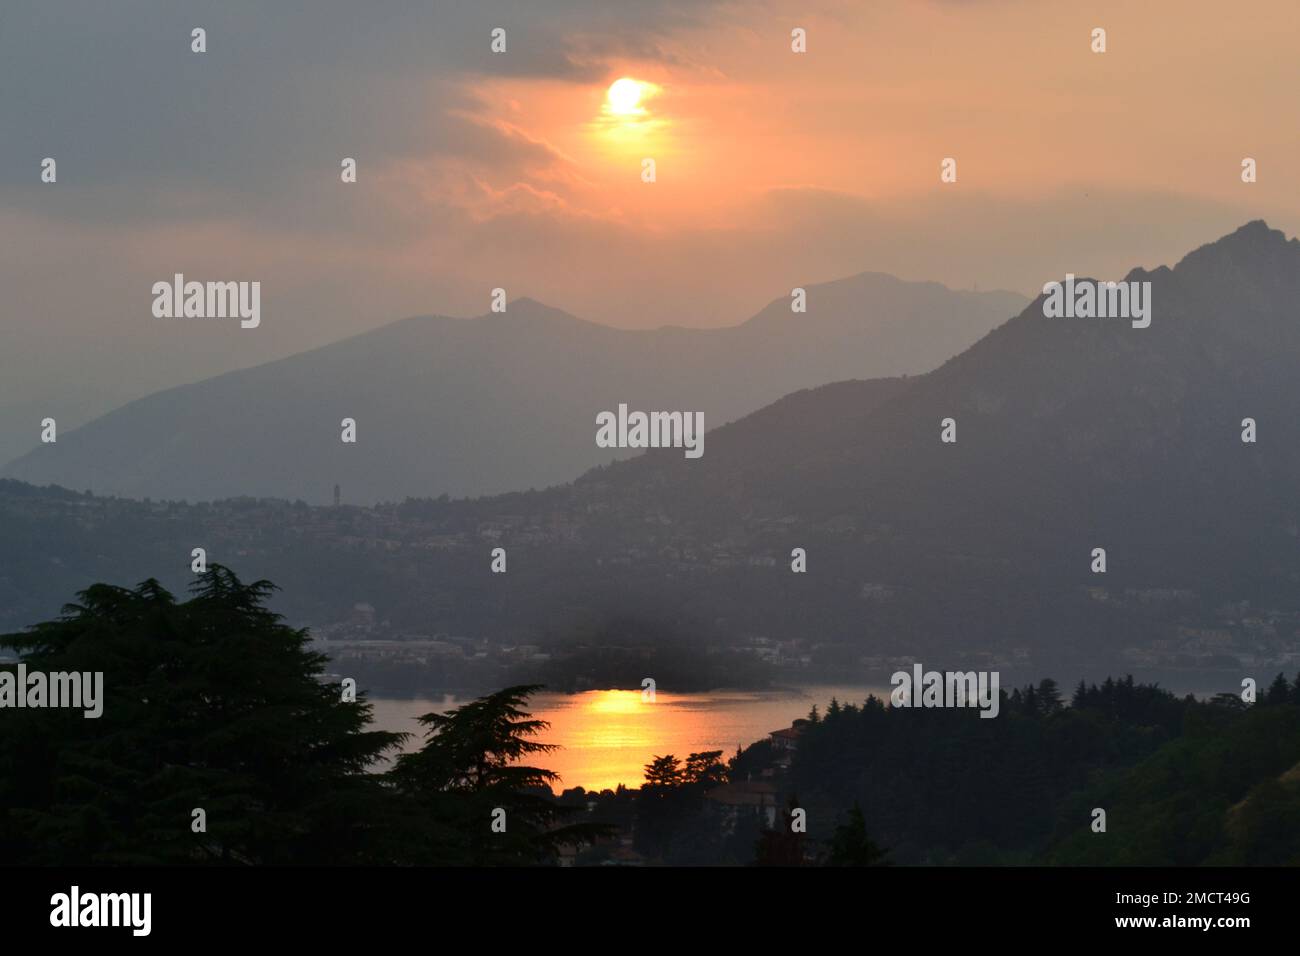 Panoramic view of the beautiful sunset over lake and mountains. Sunset sun rays coming out of the cloudy sky towards multi silhouette mountain ranges. Stock Photo